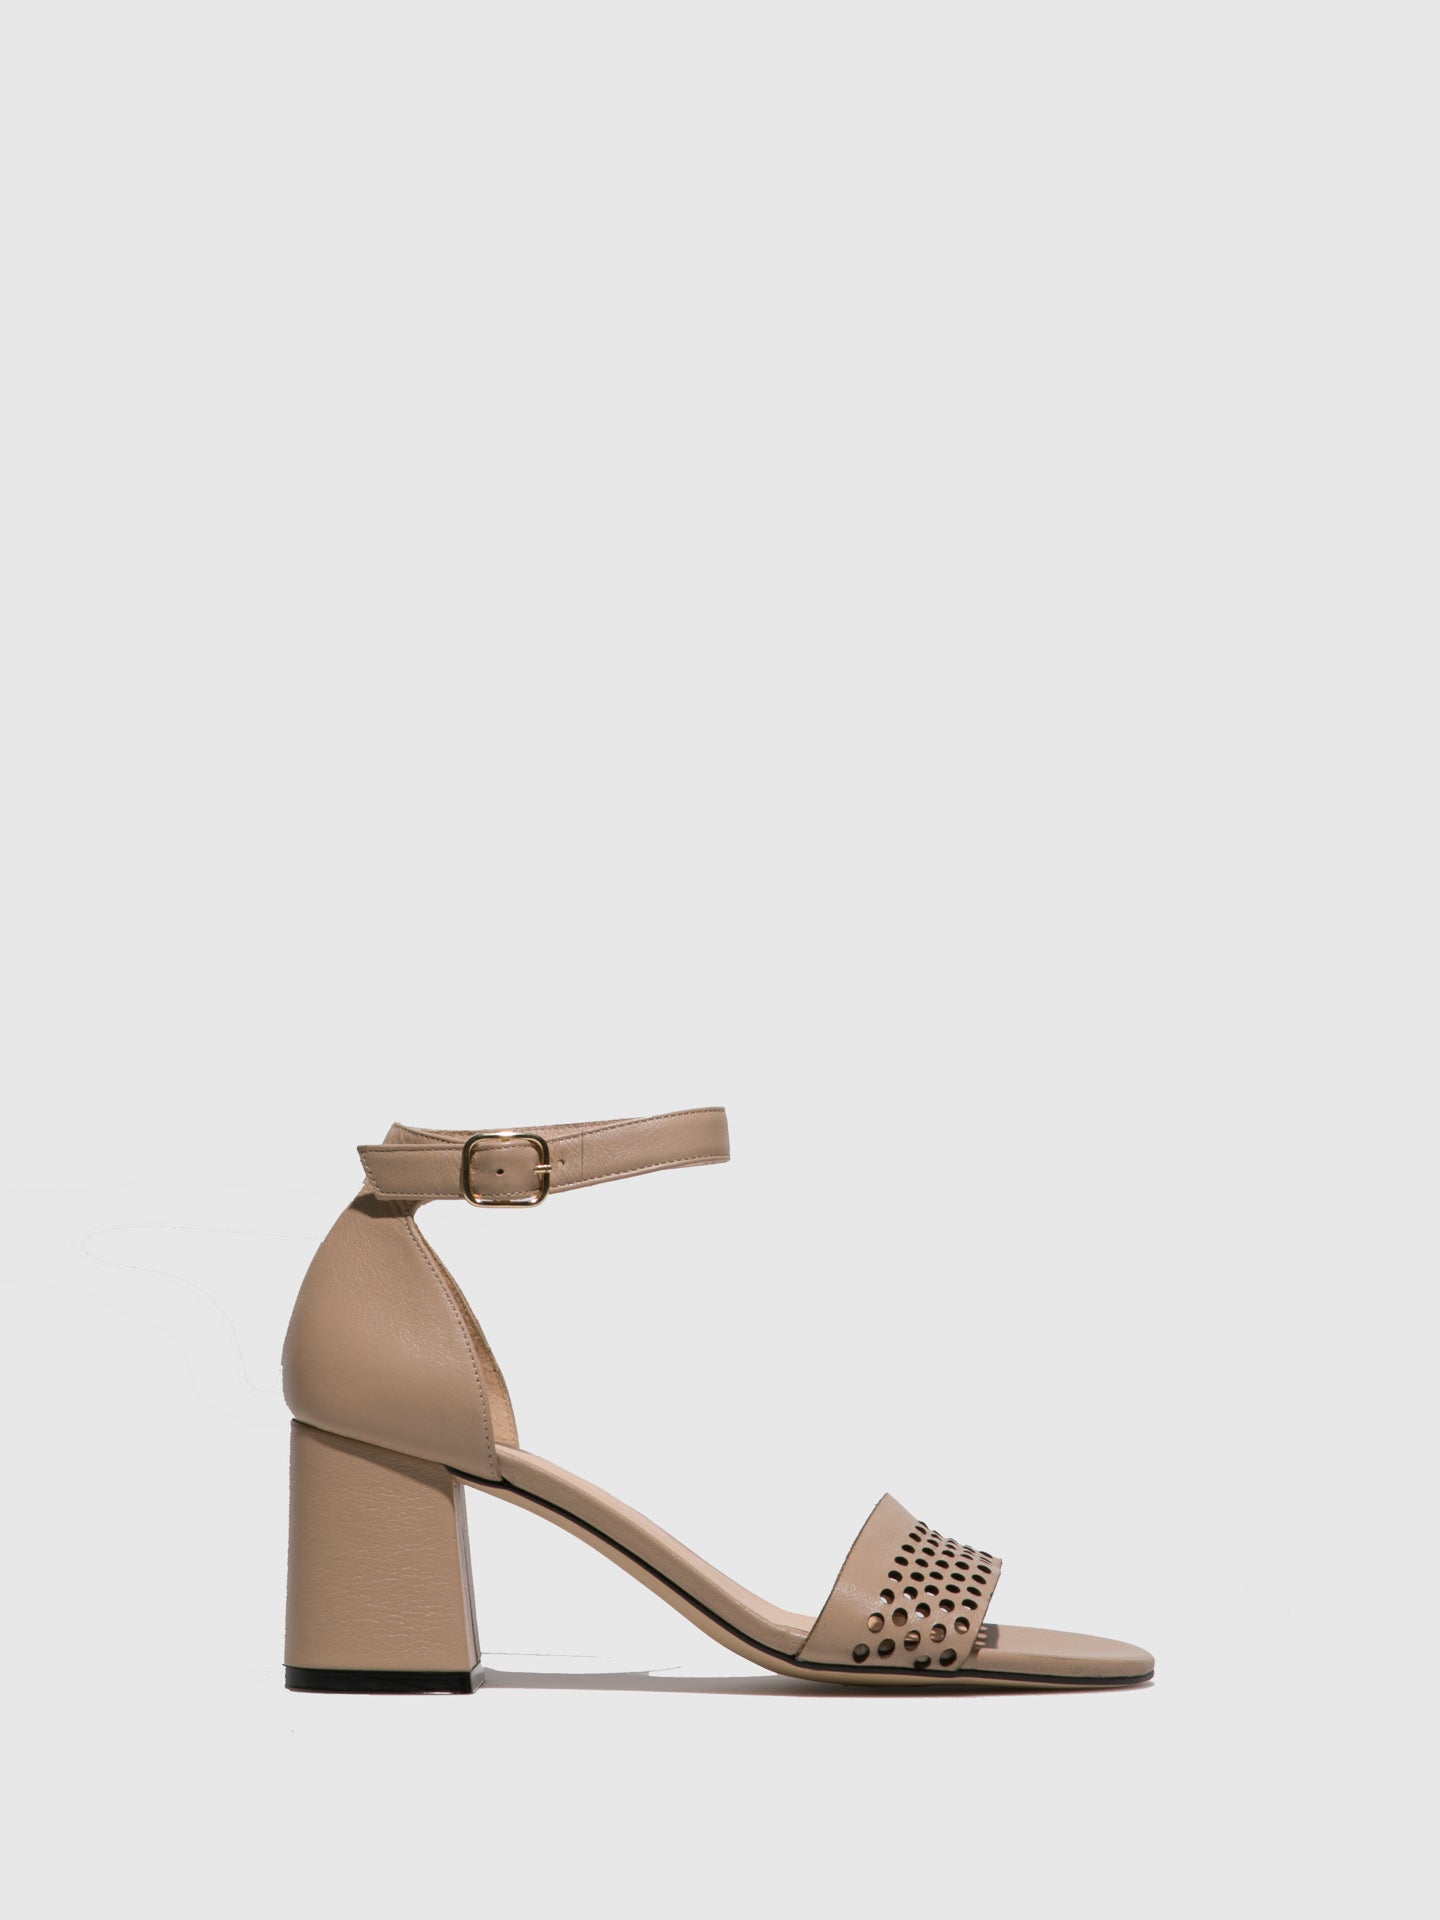 Sofia Costa Beige Ankle Strap Sandals